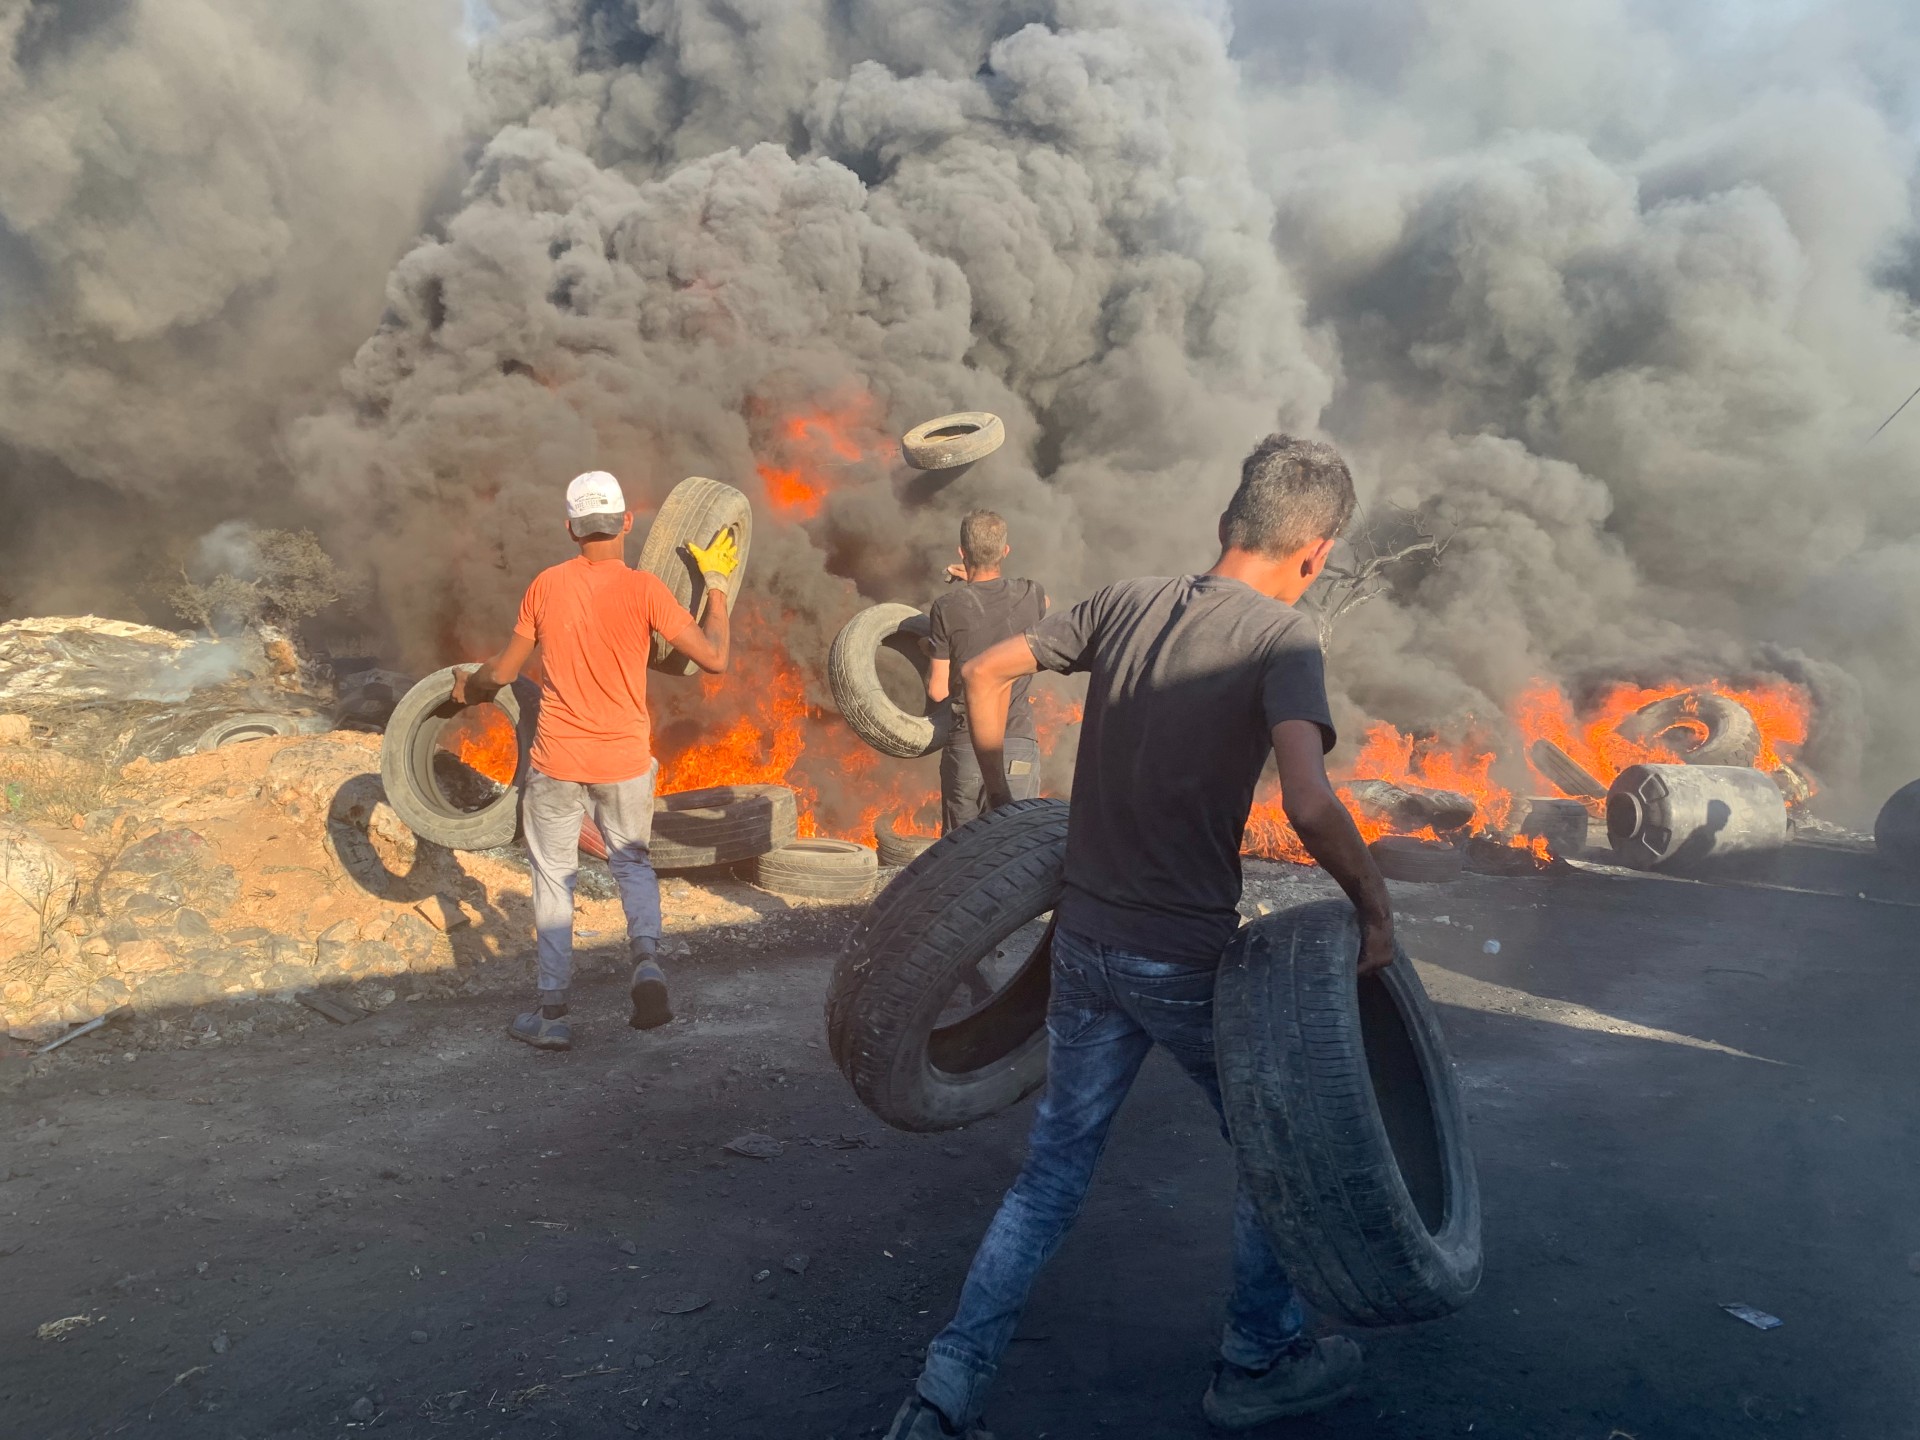 Palestinian youths set fire to tyres during a protest against an illegal Israeli settlement outpost in Beita (MEE/Shatha Hammad)